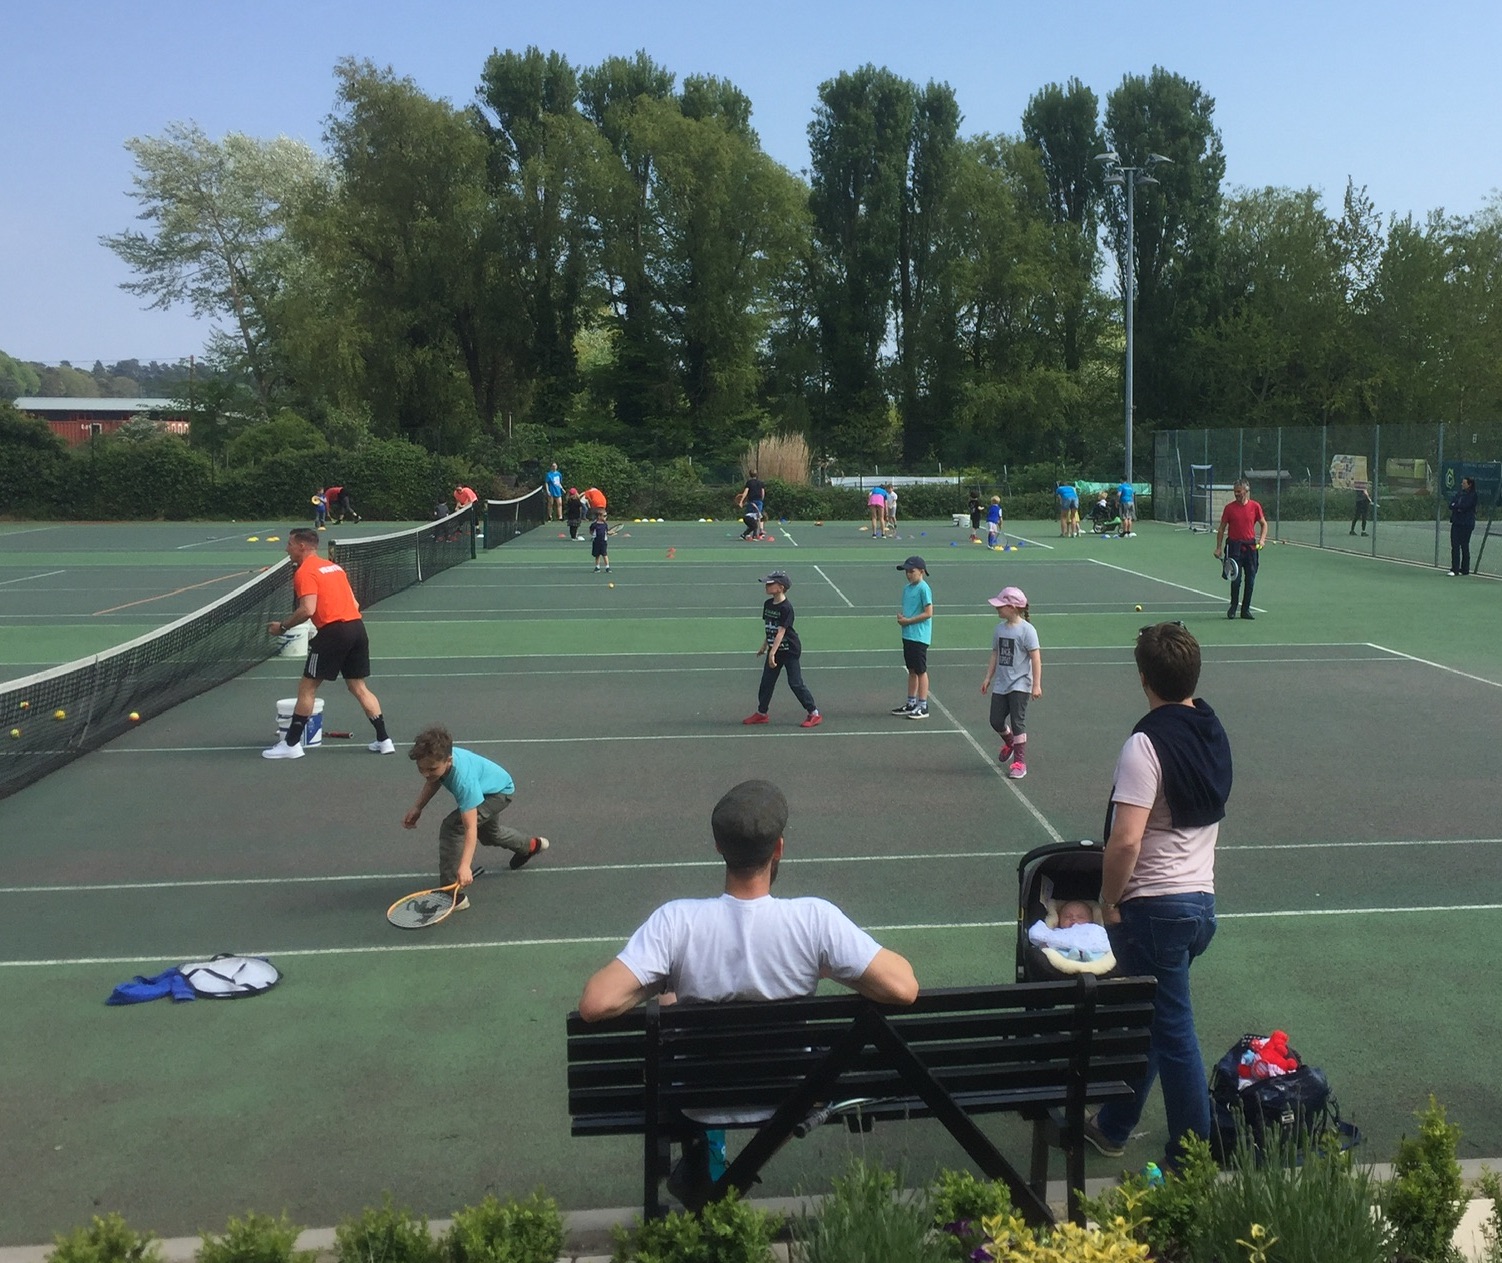 Watching the tennis players at Woodbridge Tennis Club in Suffolk